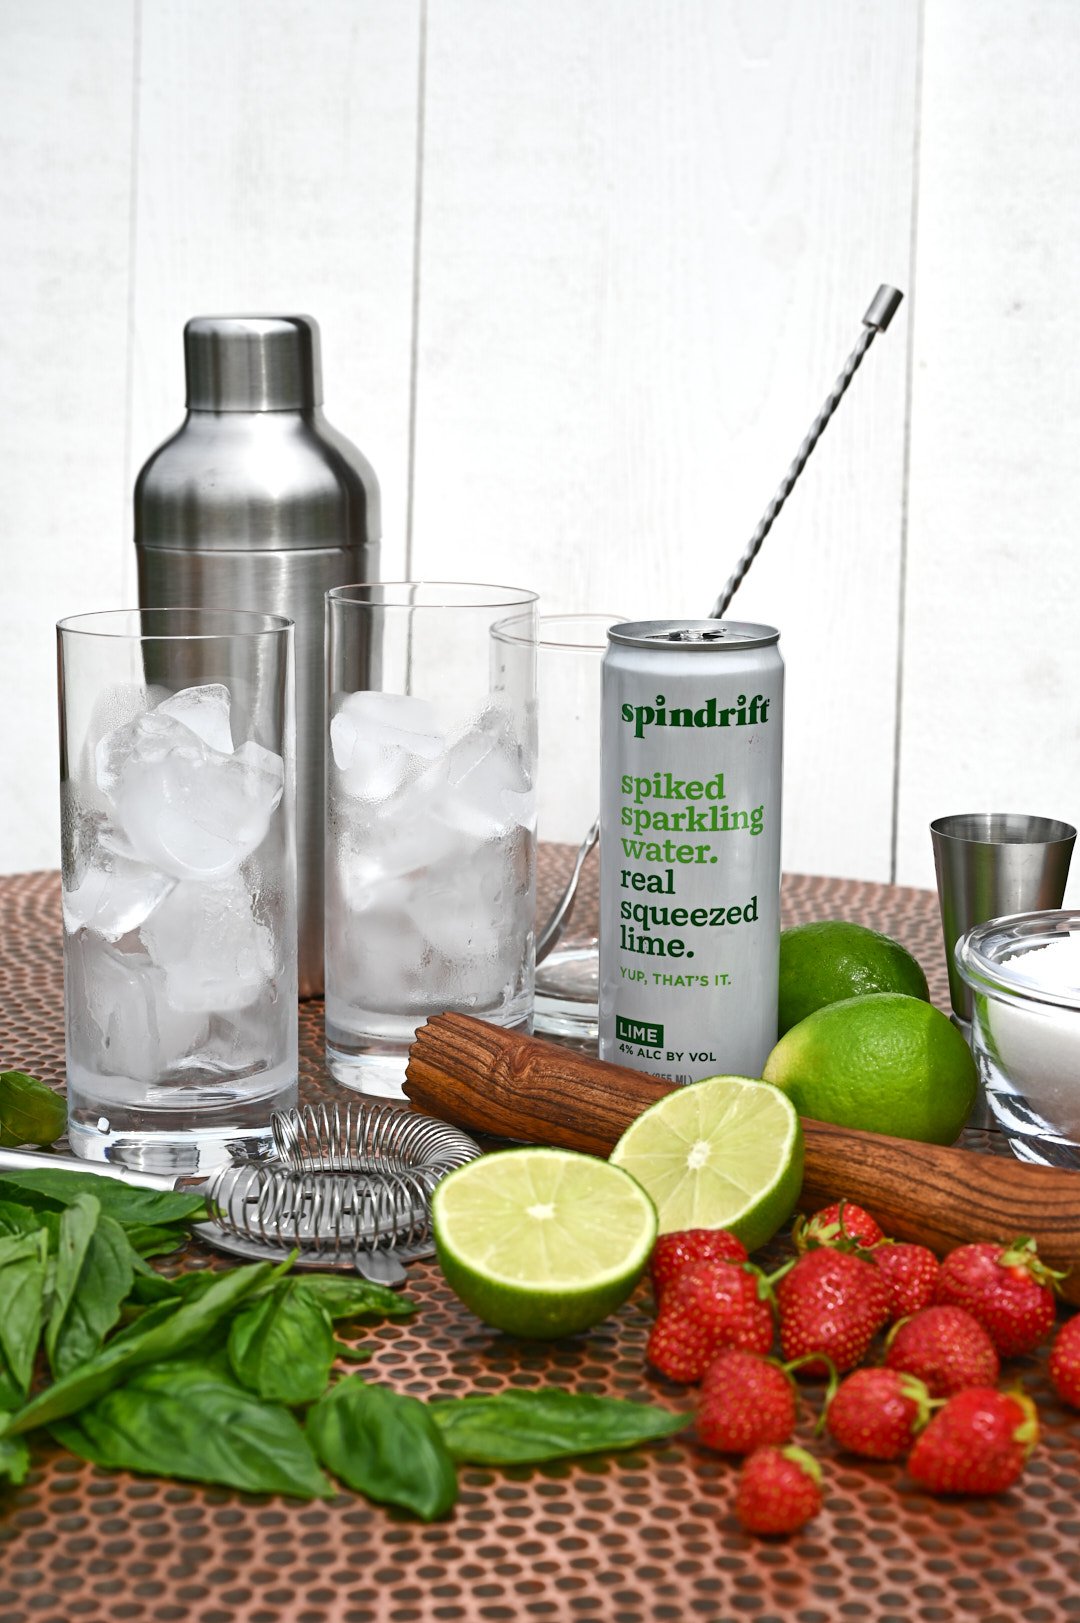 ingredients for cocktail: spindrift sparkling drink, limes, strawberries and mint with iced glasses and cocktail shaker